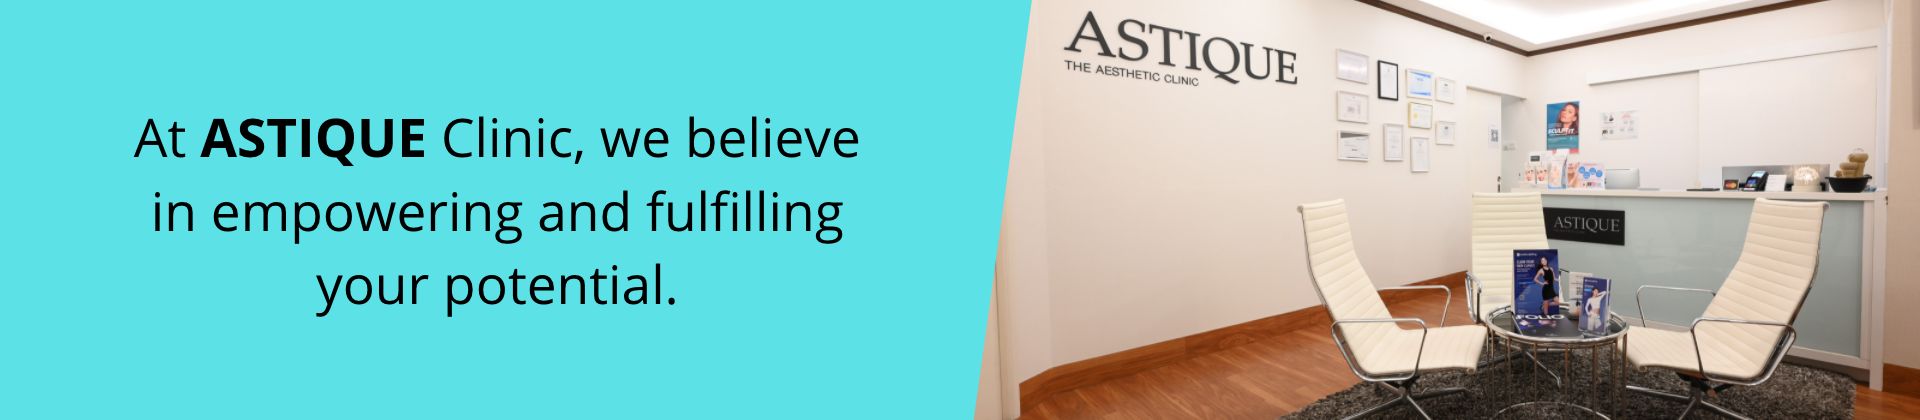 The Aesthetic Clinic who believe in empowering and fulfilling your potential.